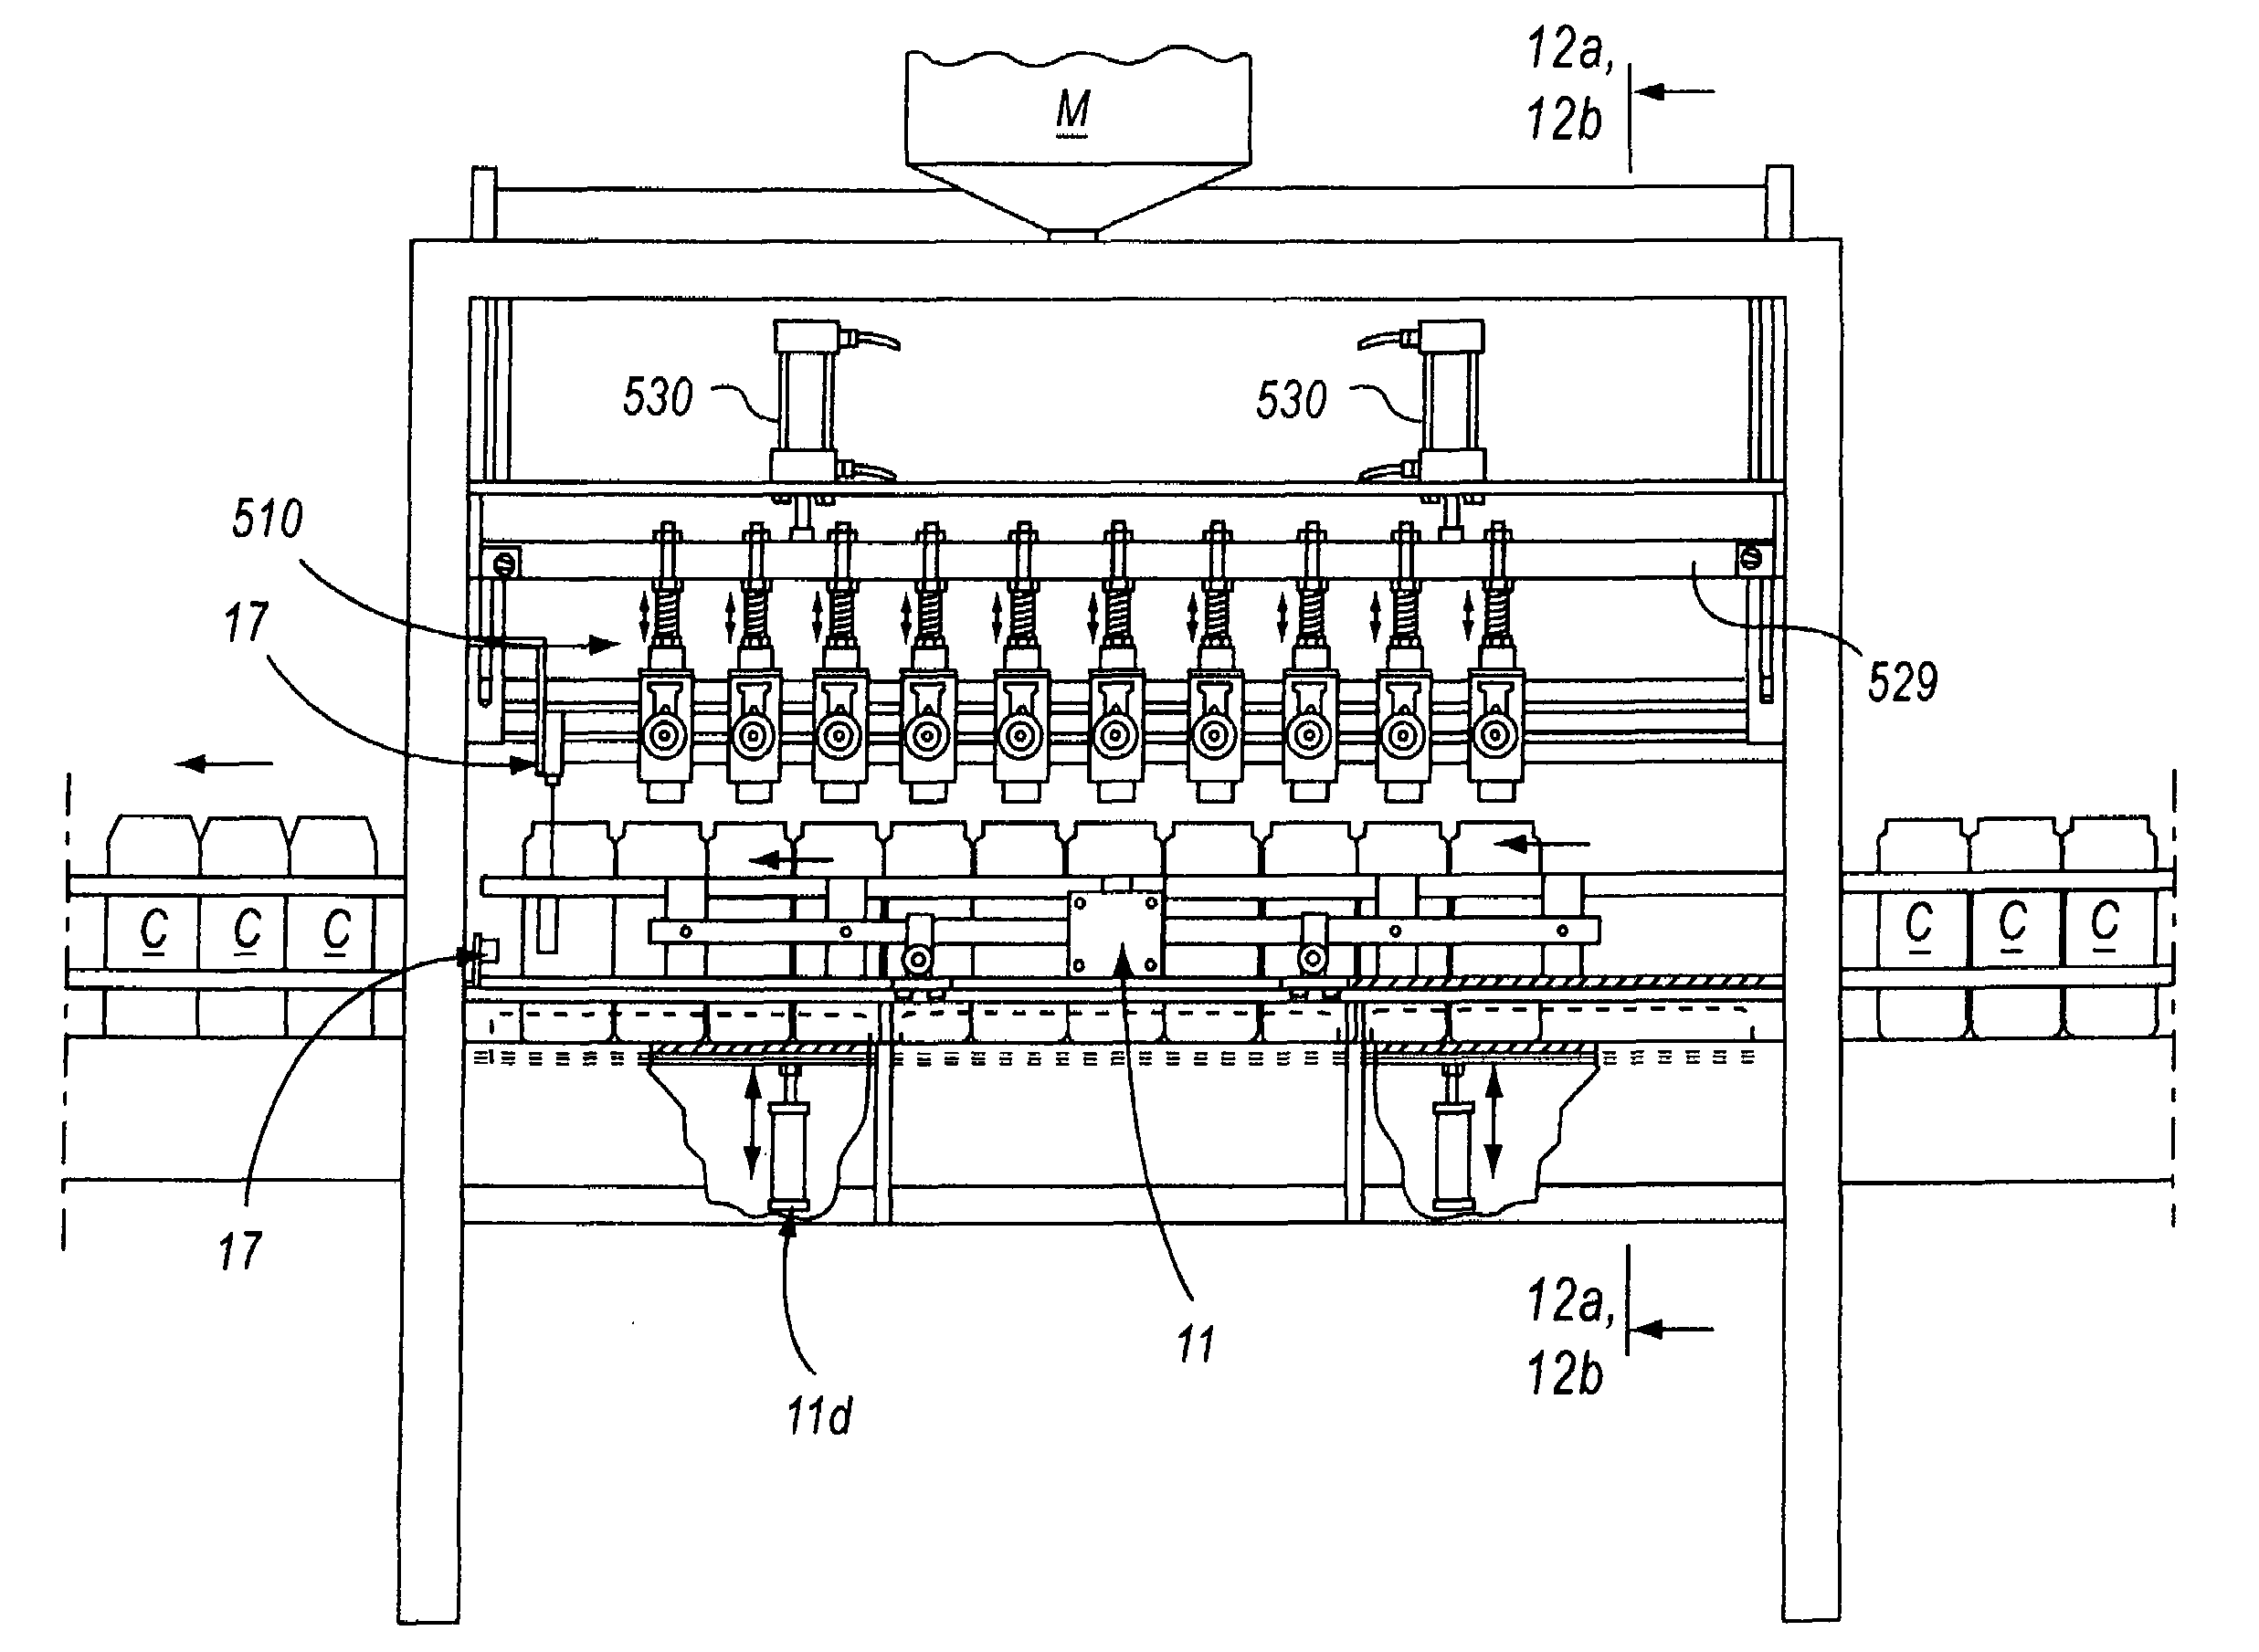 Apparatus for the simultaneous filling of precise amounts of viscous liquid material in a sanitary environment